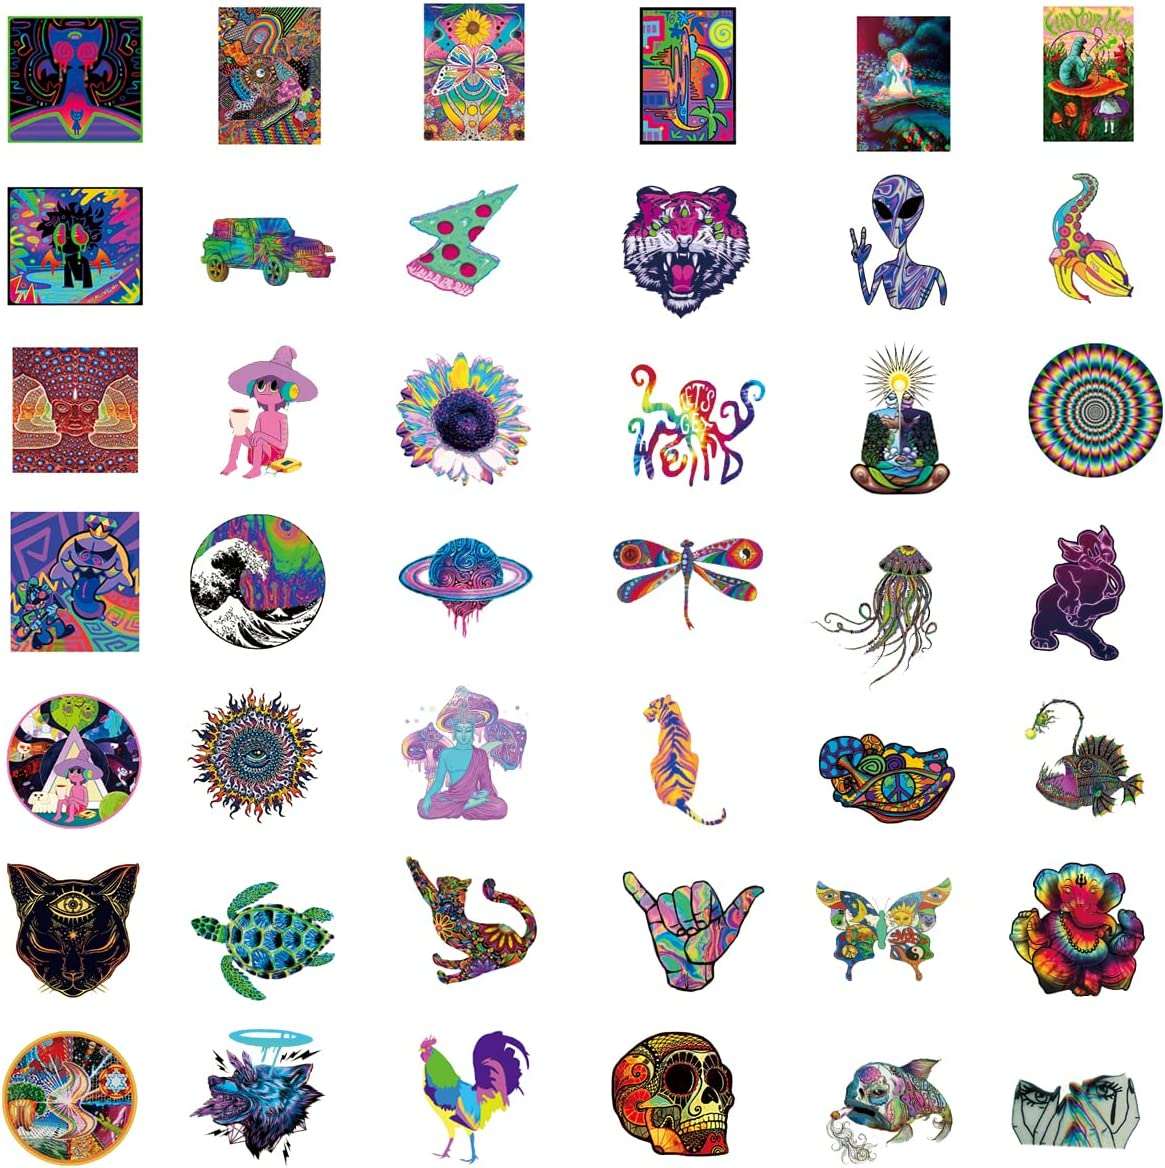 The Psychedelic Stickers For Adults is a simple and interesting